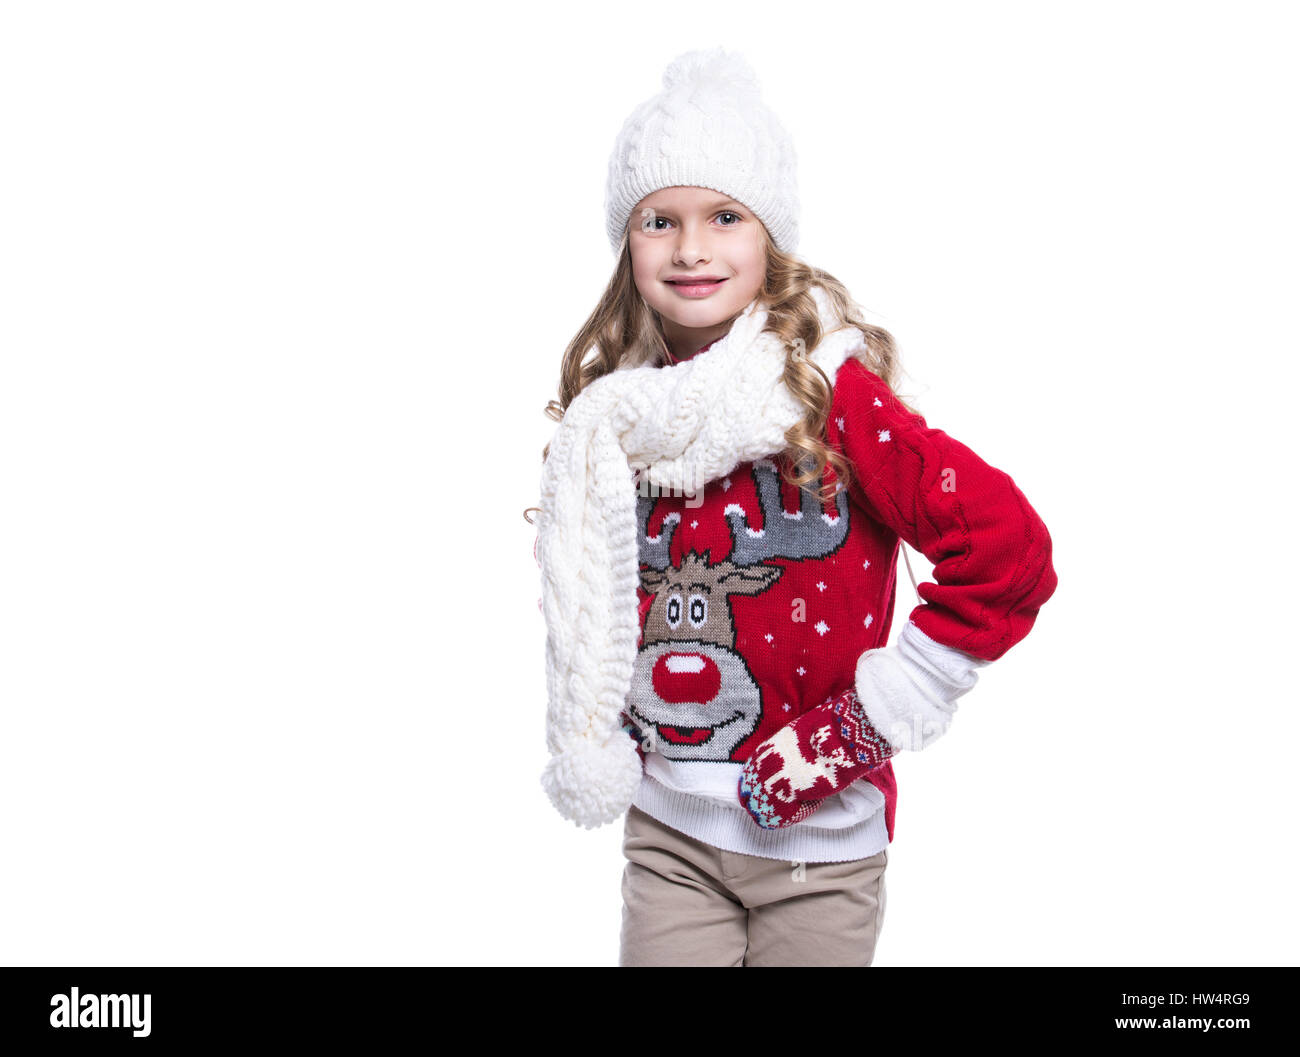 Cute smiling little girl with curly hairstyle wearing knitted sweater, scarf, hat and gloves isolated on white background. Winter clothes Stock Photo